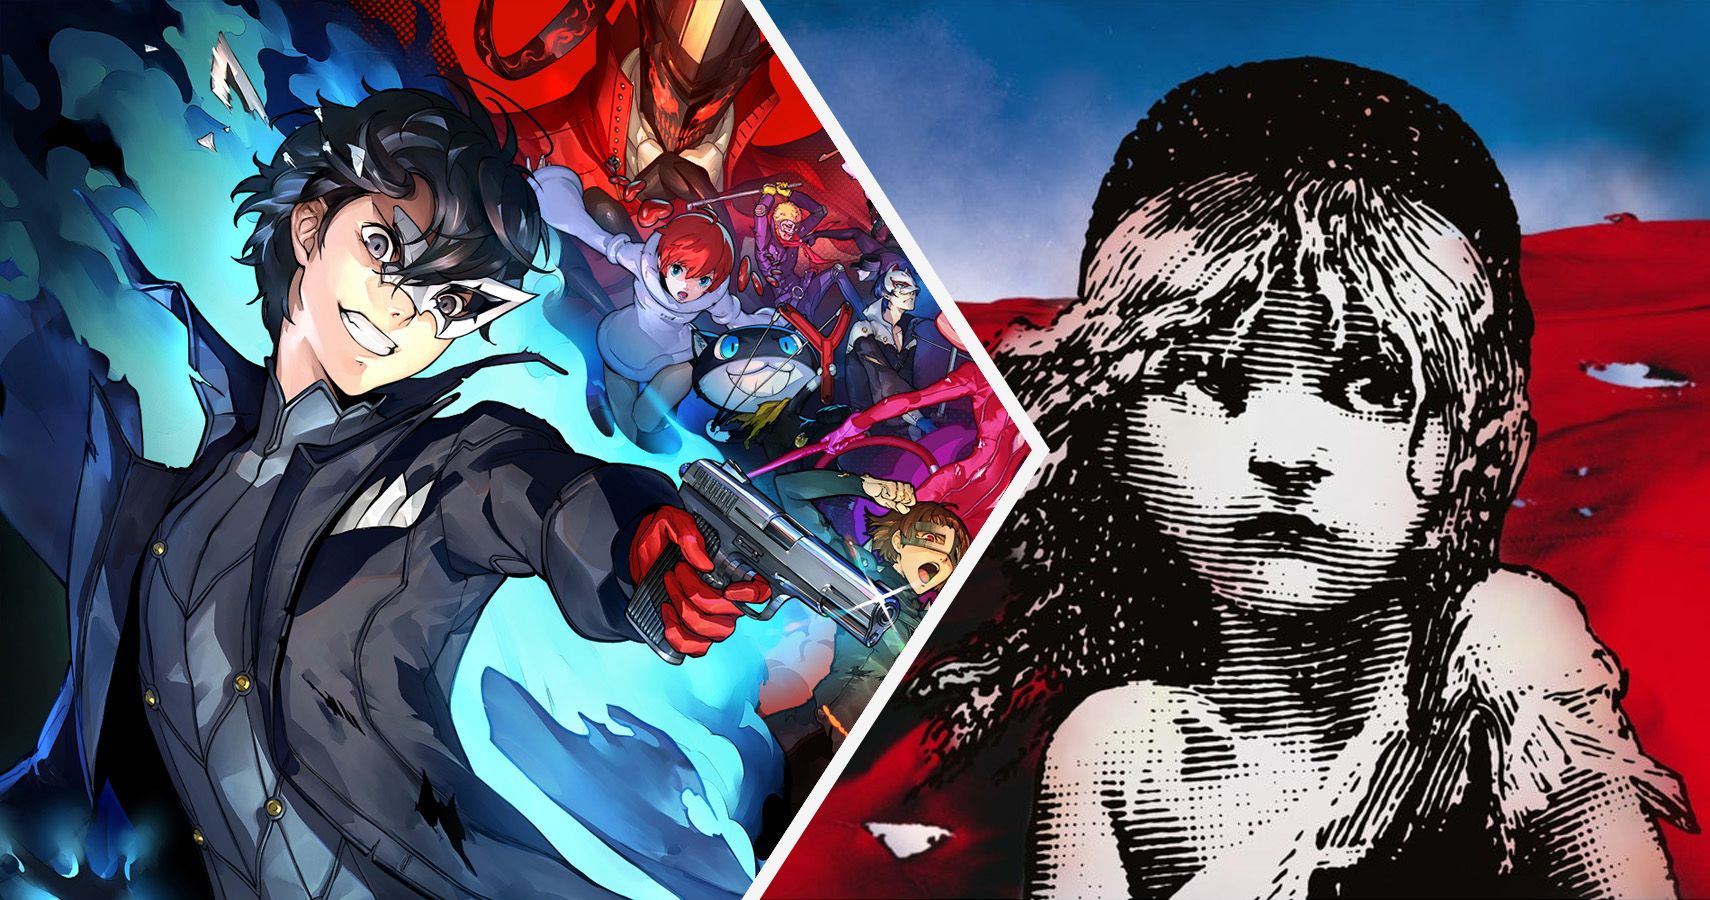 Persona 5 Strikers Includes A Les Miserables Tribute You Probably ...